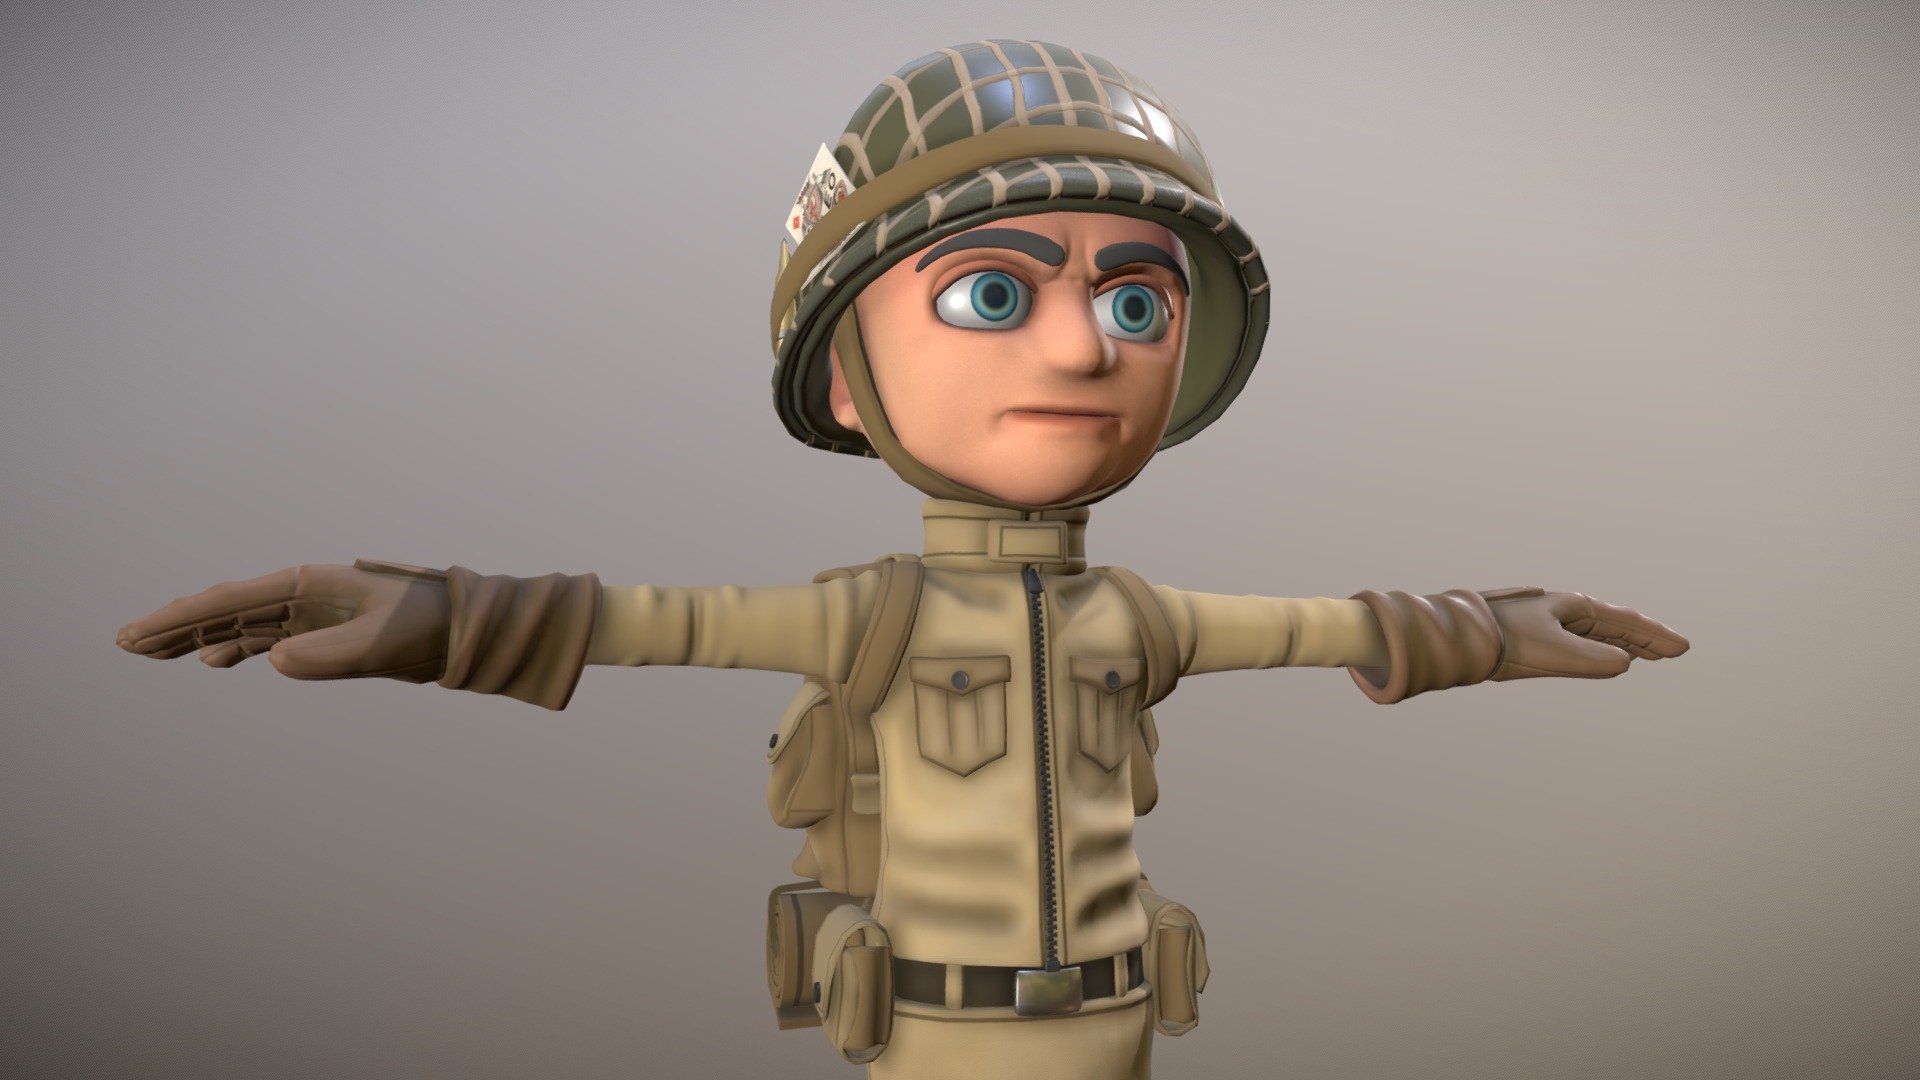 It's a World War 2 Soldier character with great topology you can use it in games or in rendering thanks.

have fun 3d model